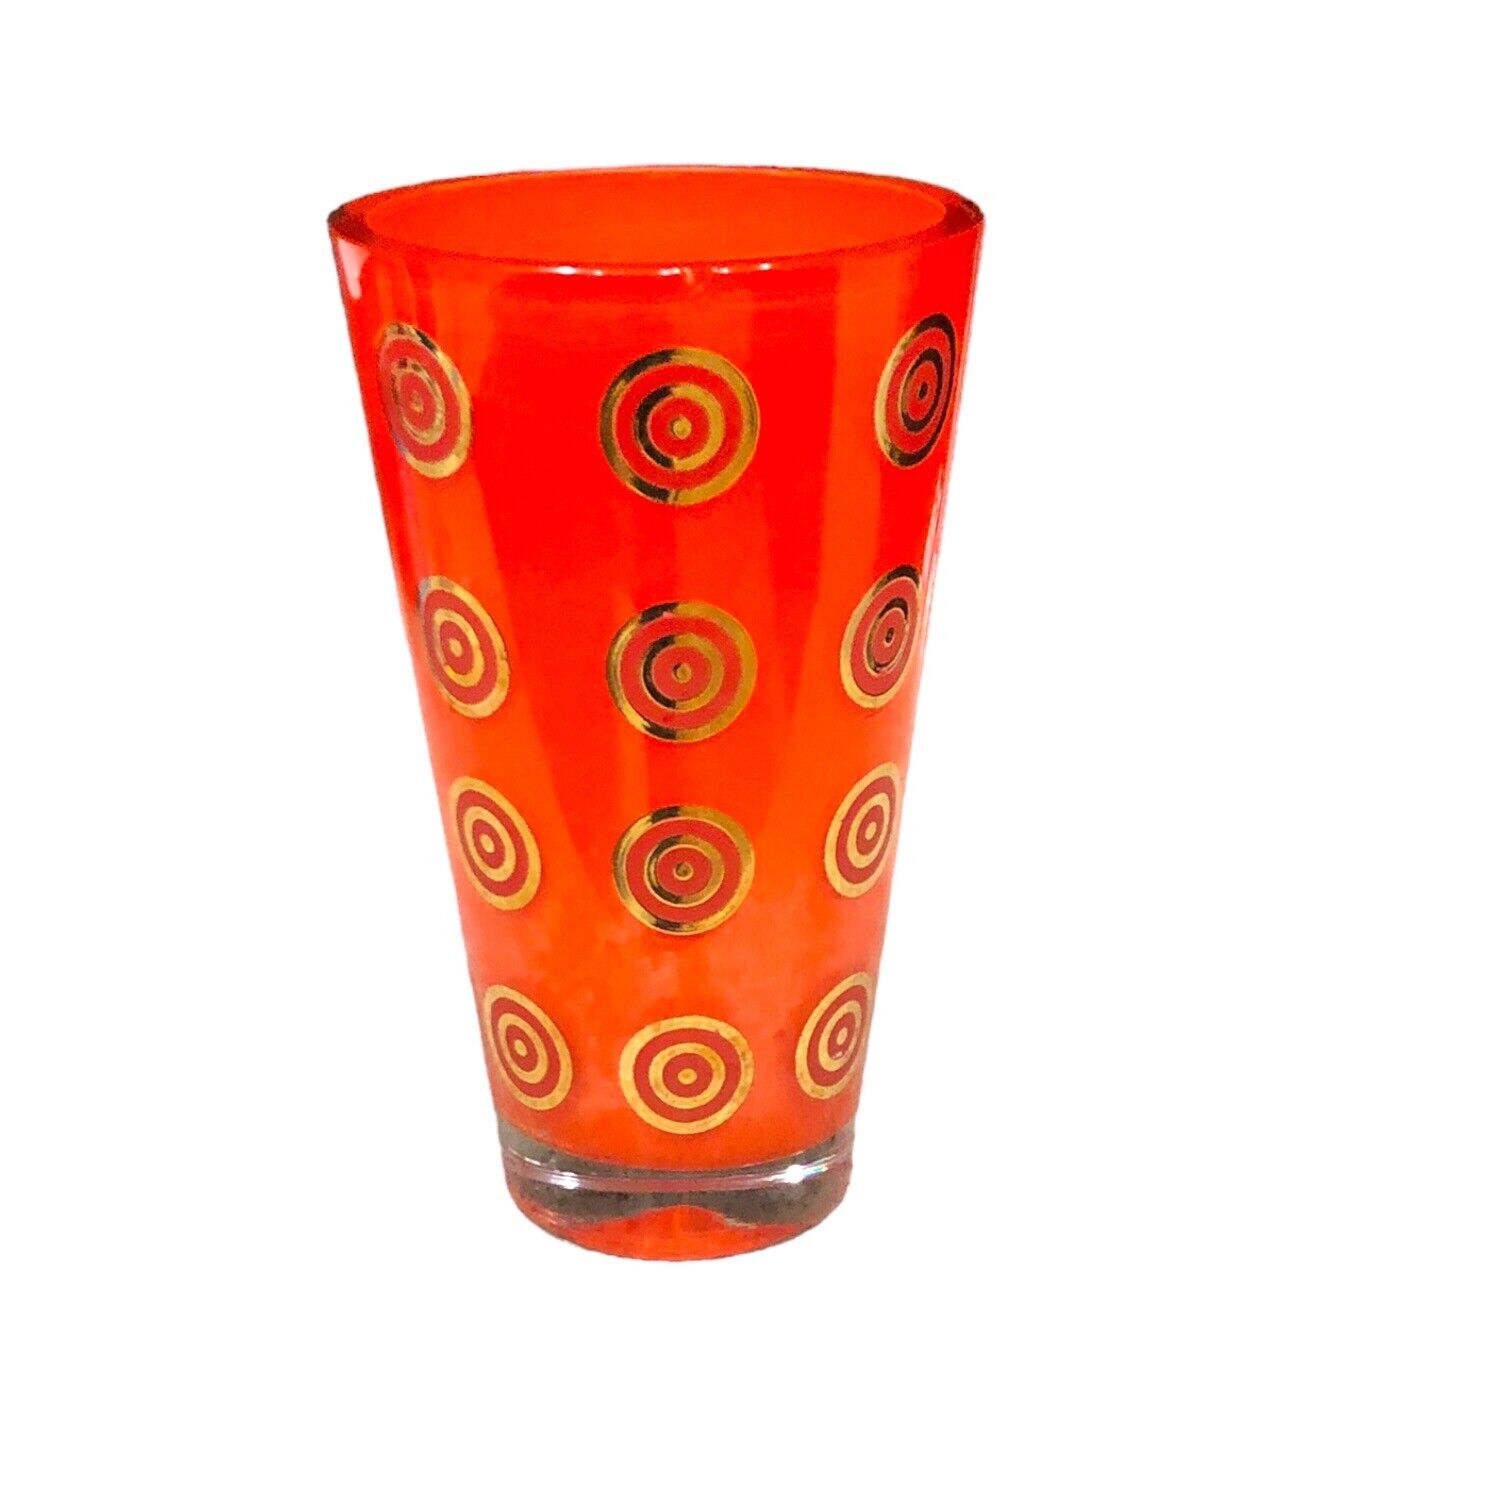 80s Orange art glass vase ettore sottsass collection made in italy gold swirl